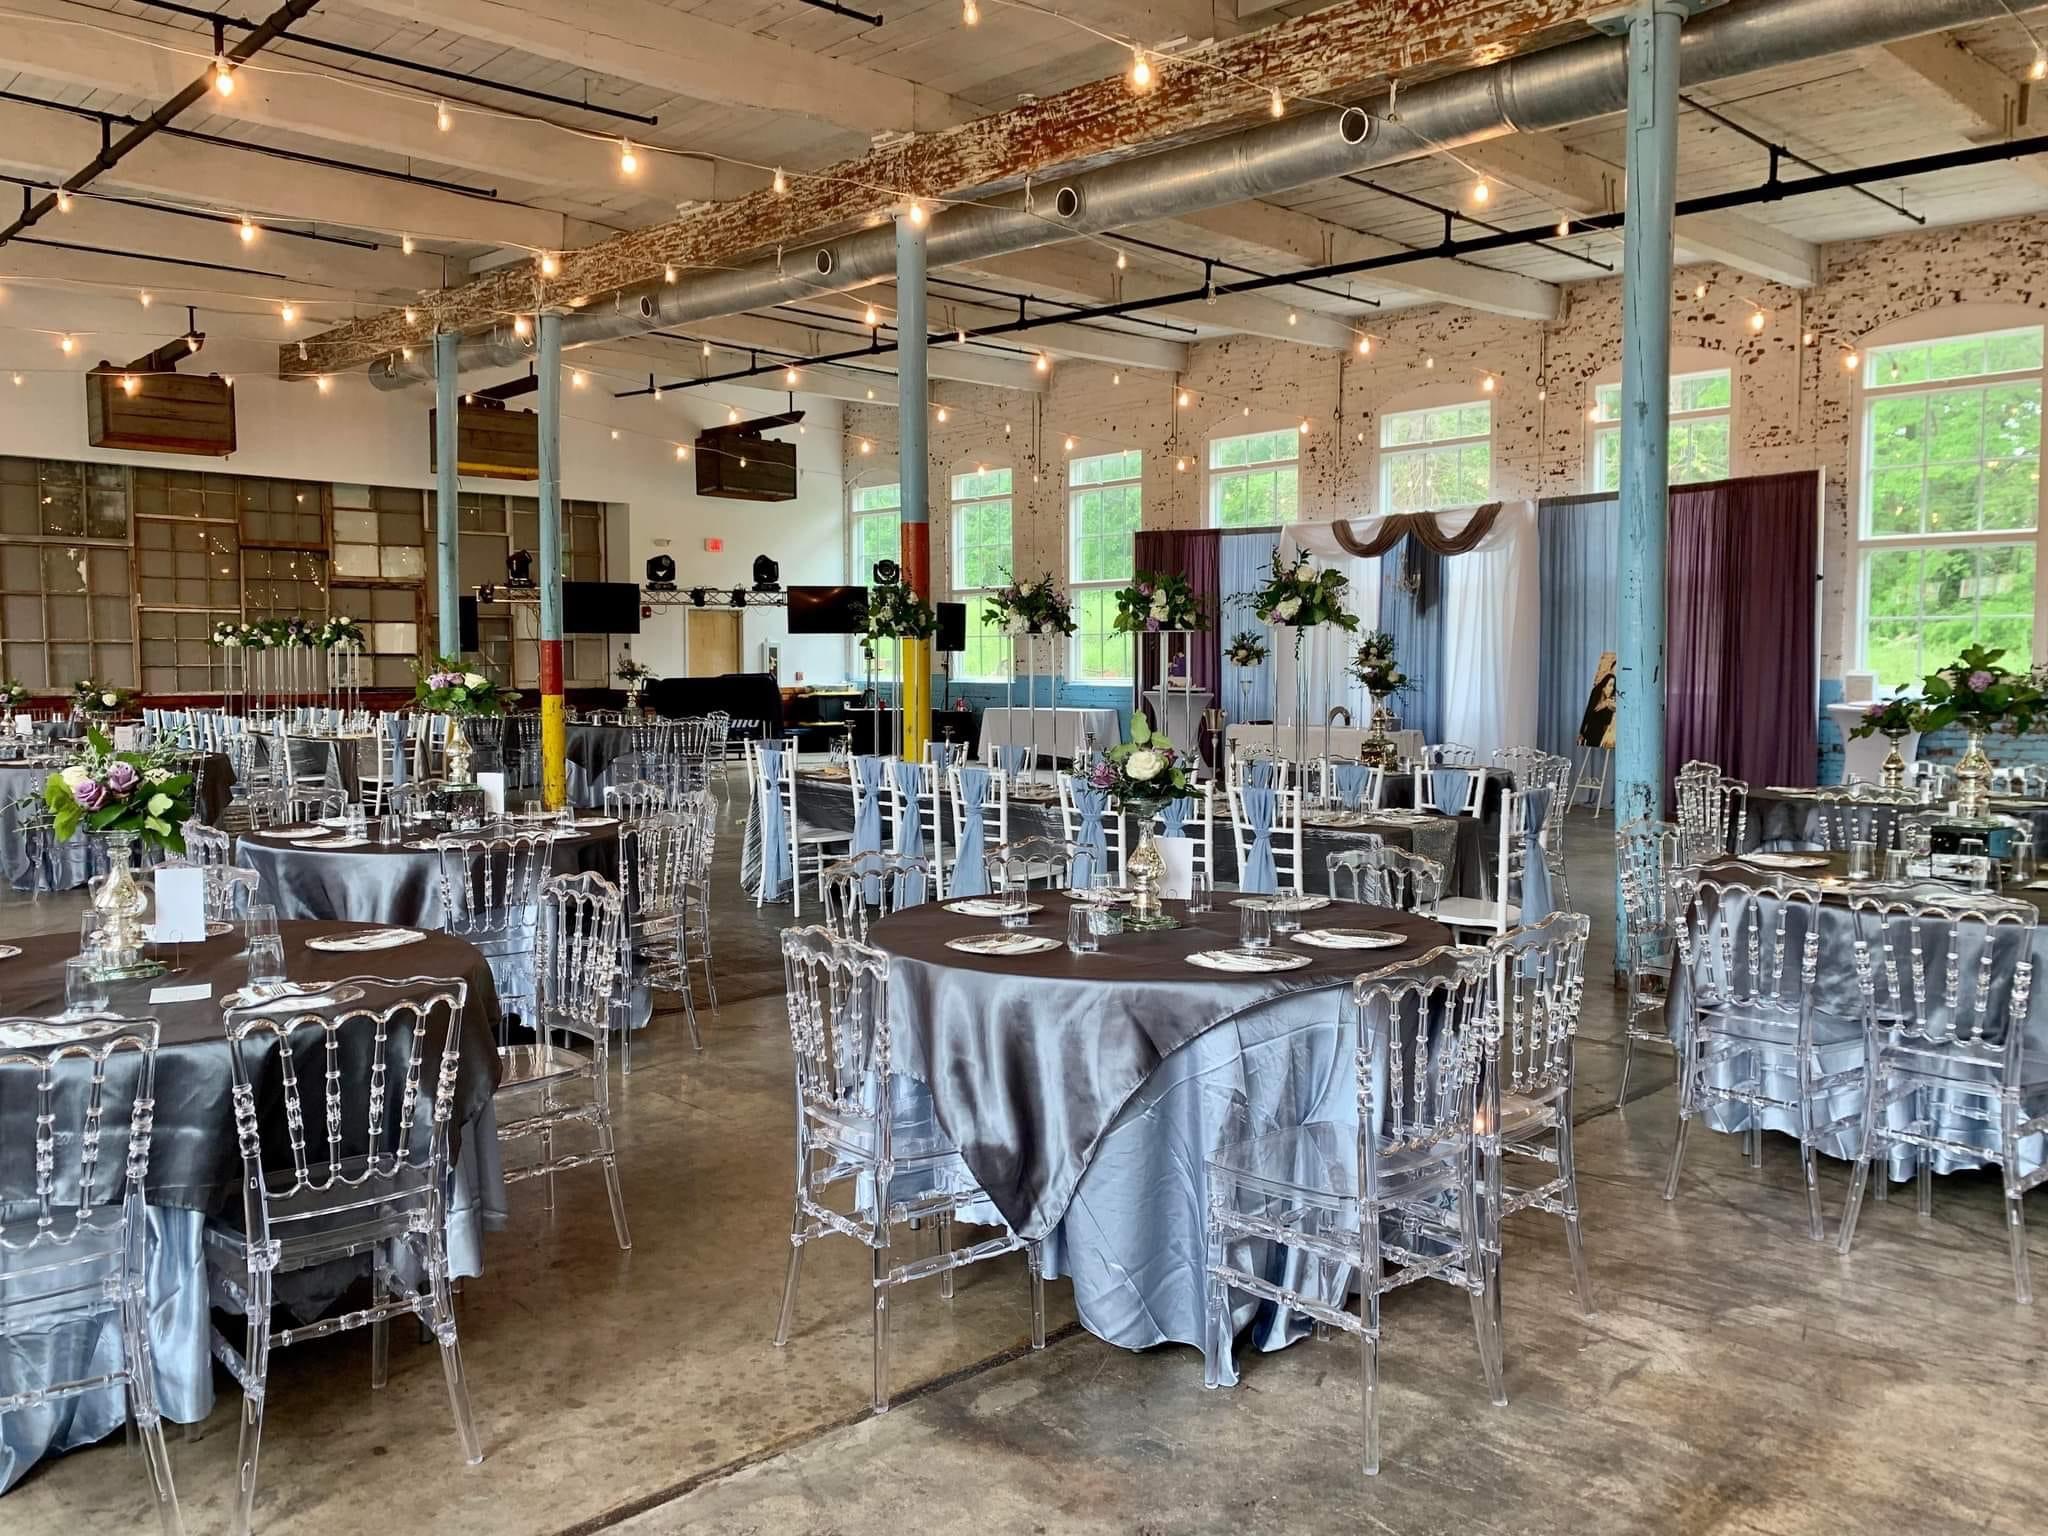 Event space, stay, quinceria, business meet space, wedding, venues, local events, dalton, chattanooga, calhoun, birthdays, boutique space